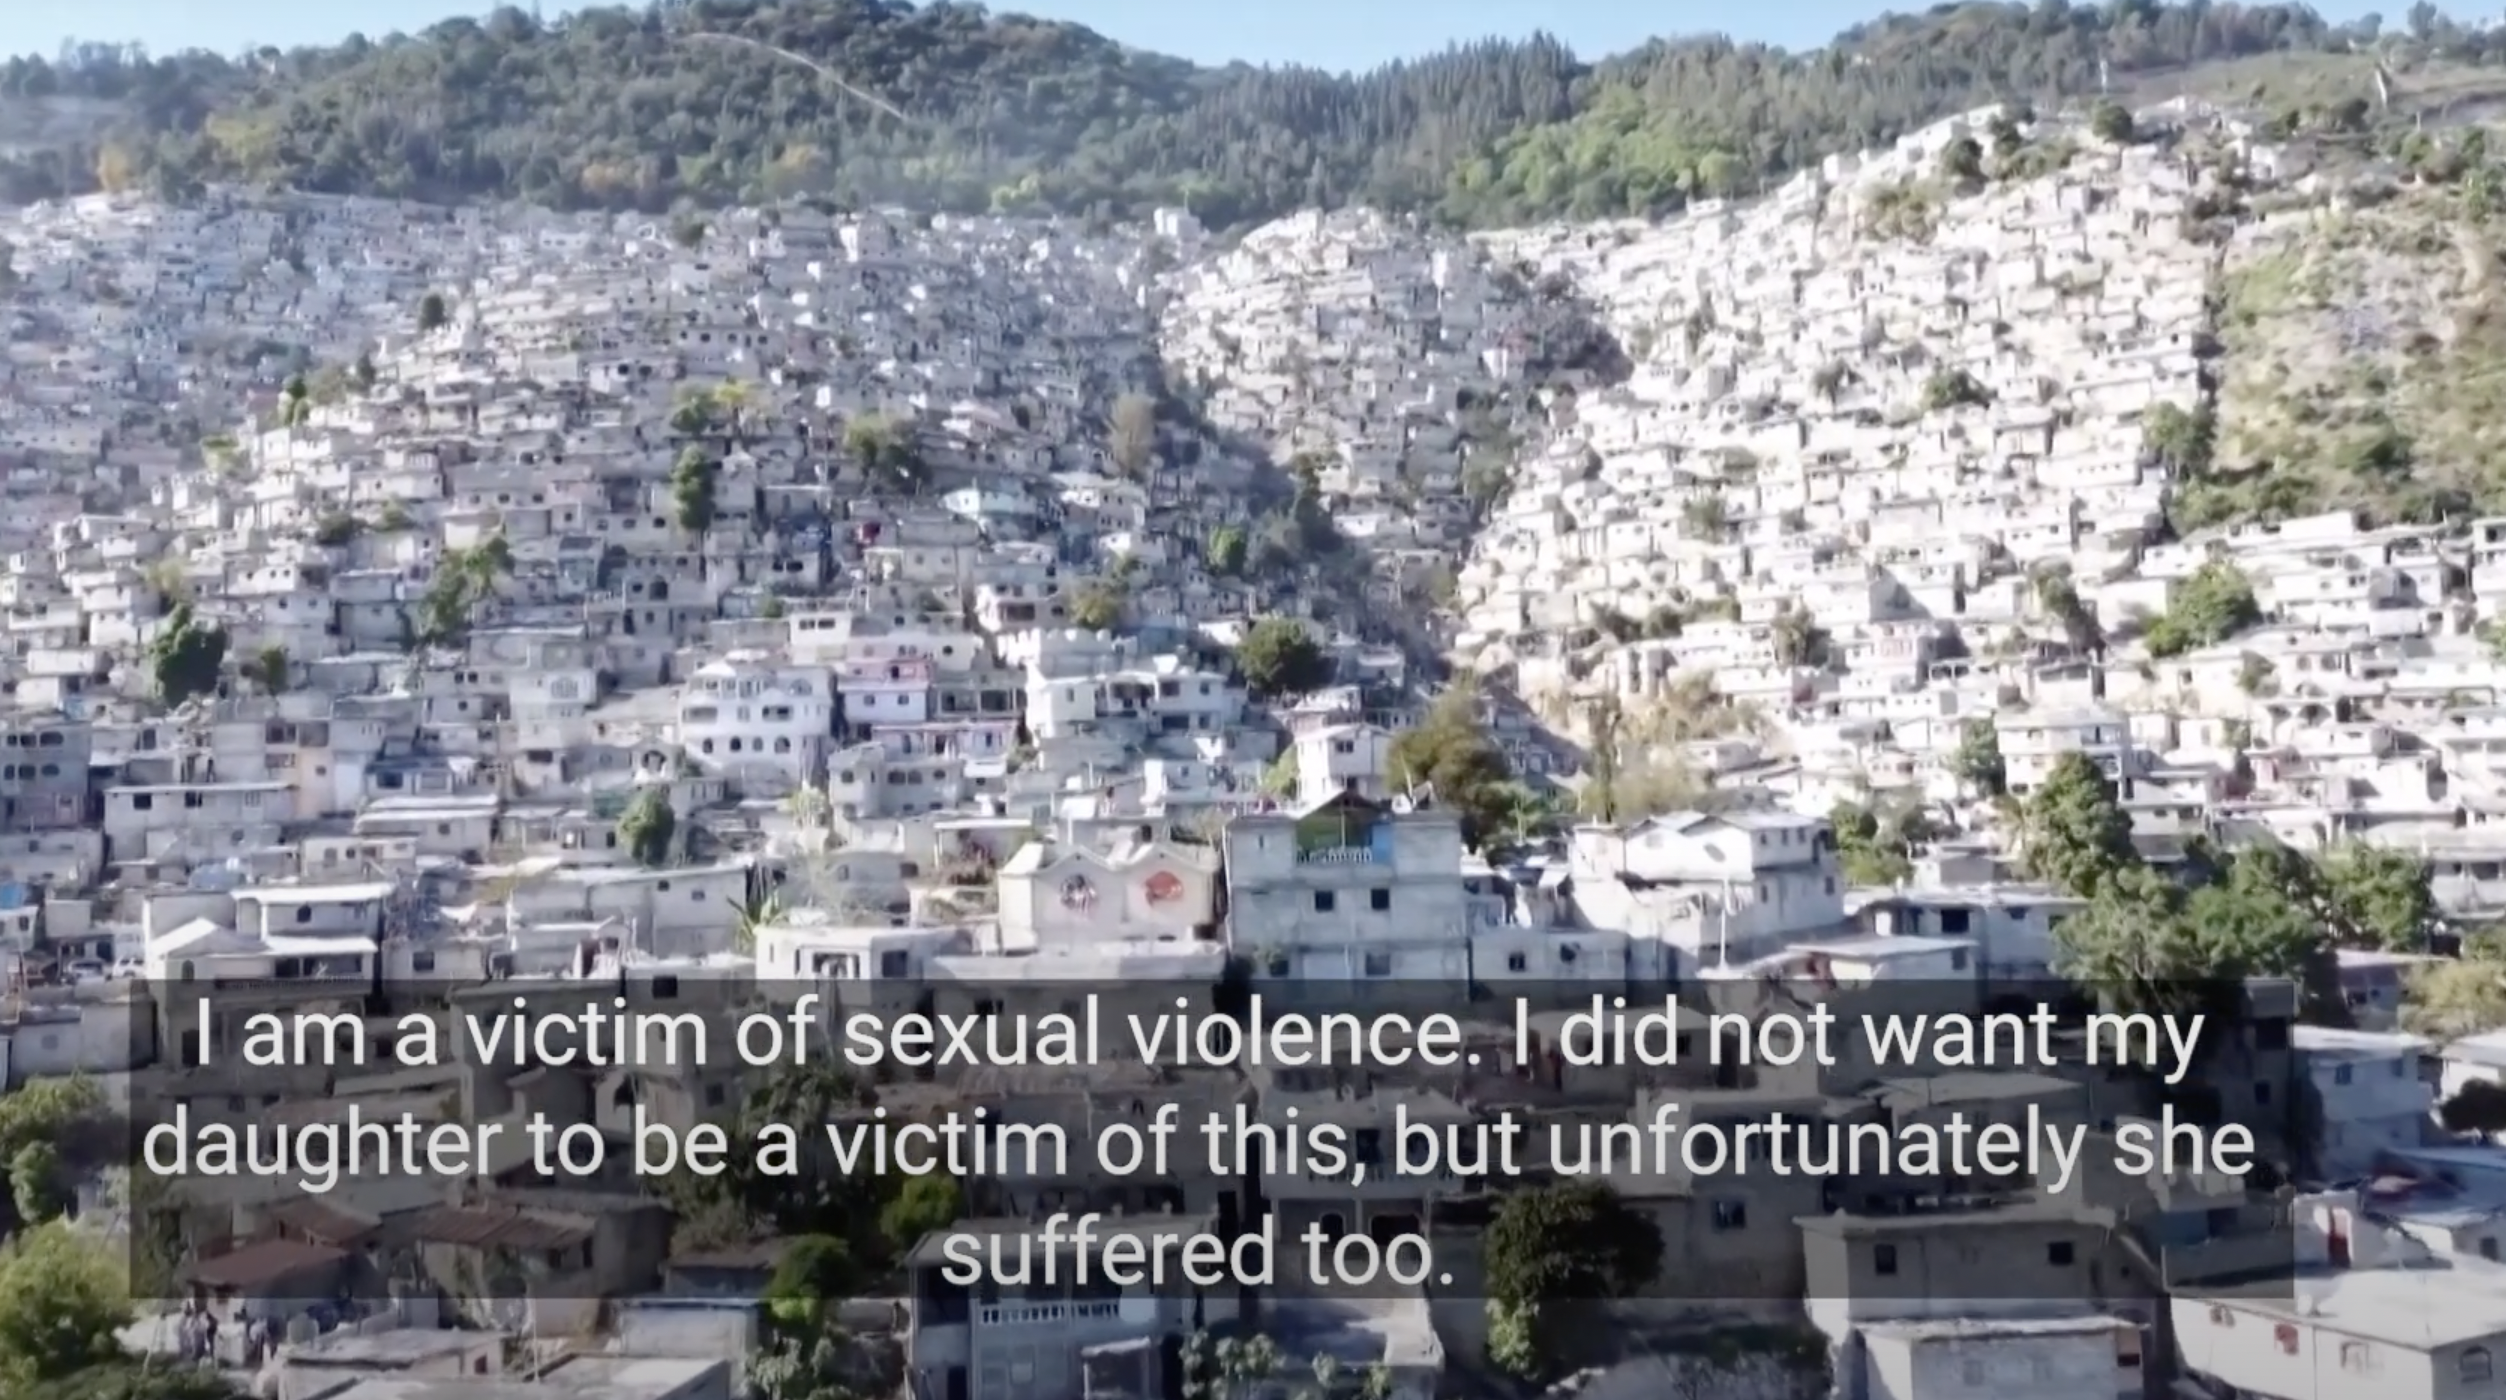 Haitian Gangs Use Rape As Weapon Of Terror - And There Is Little Support For Survivors